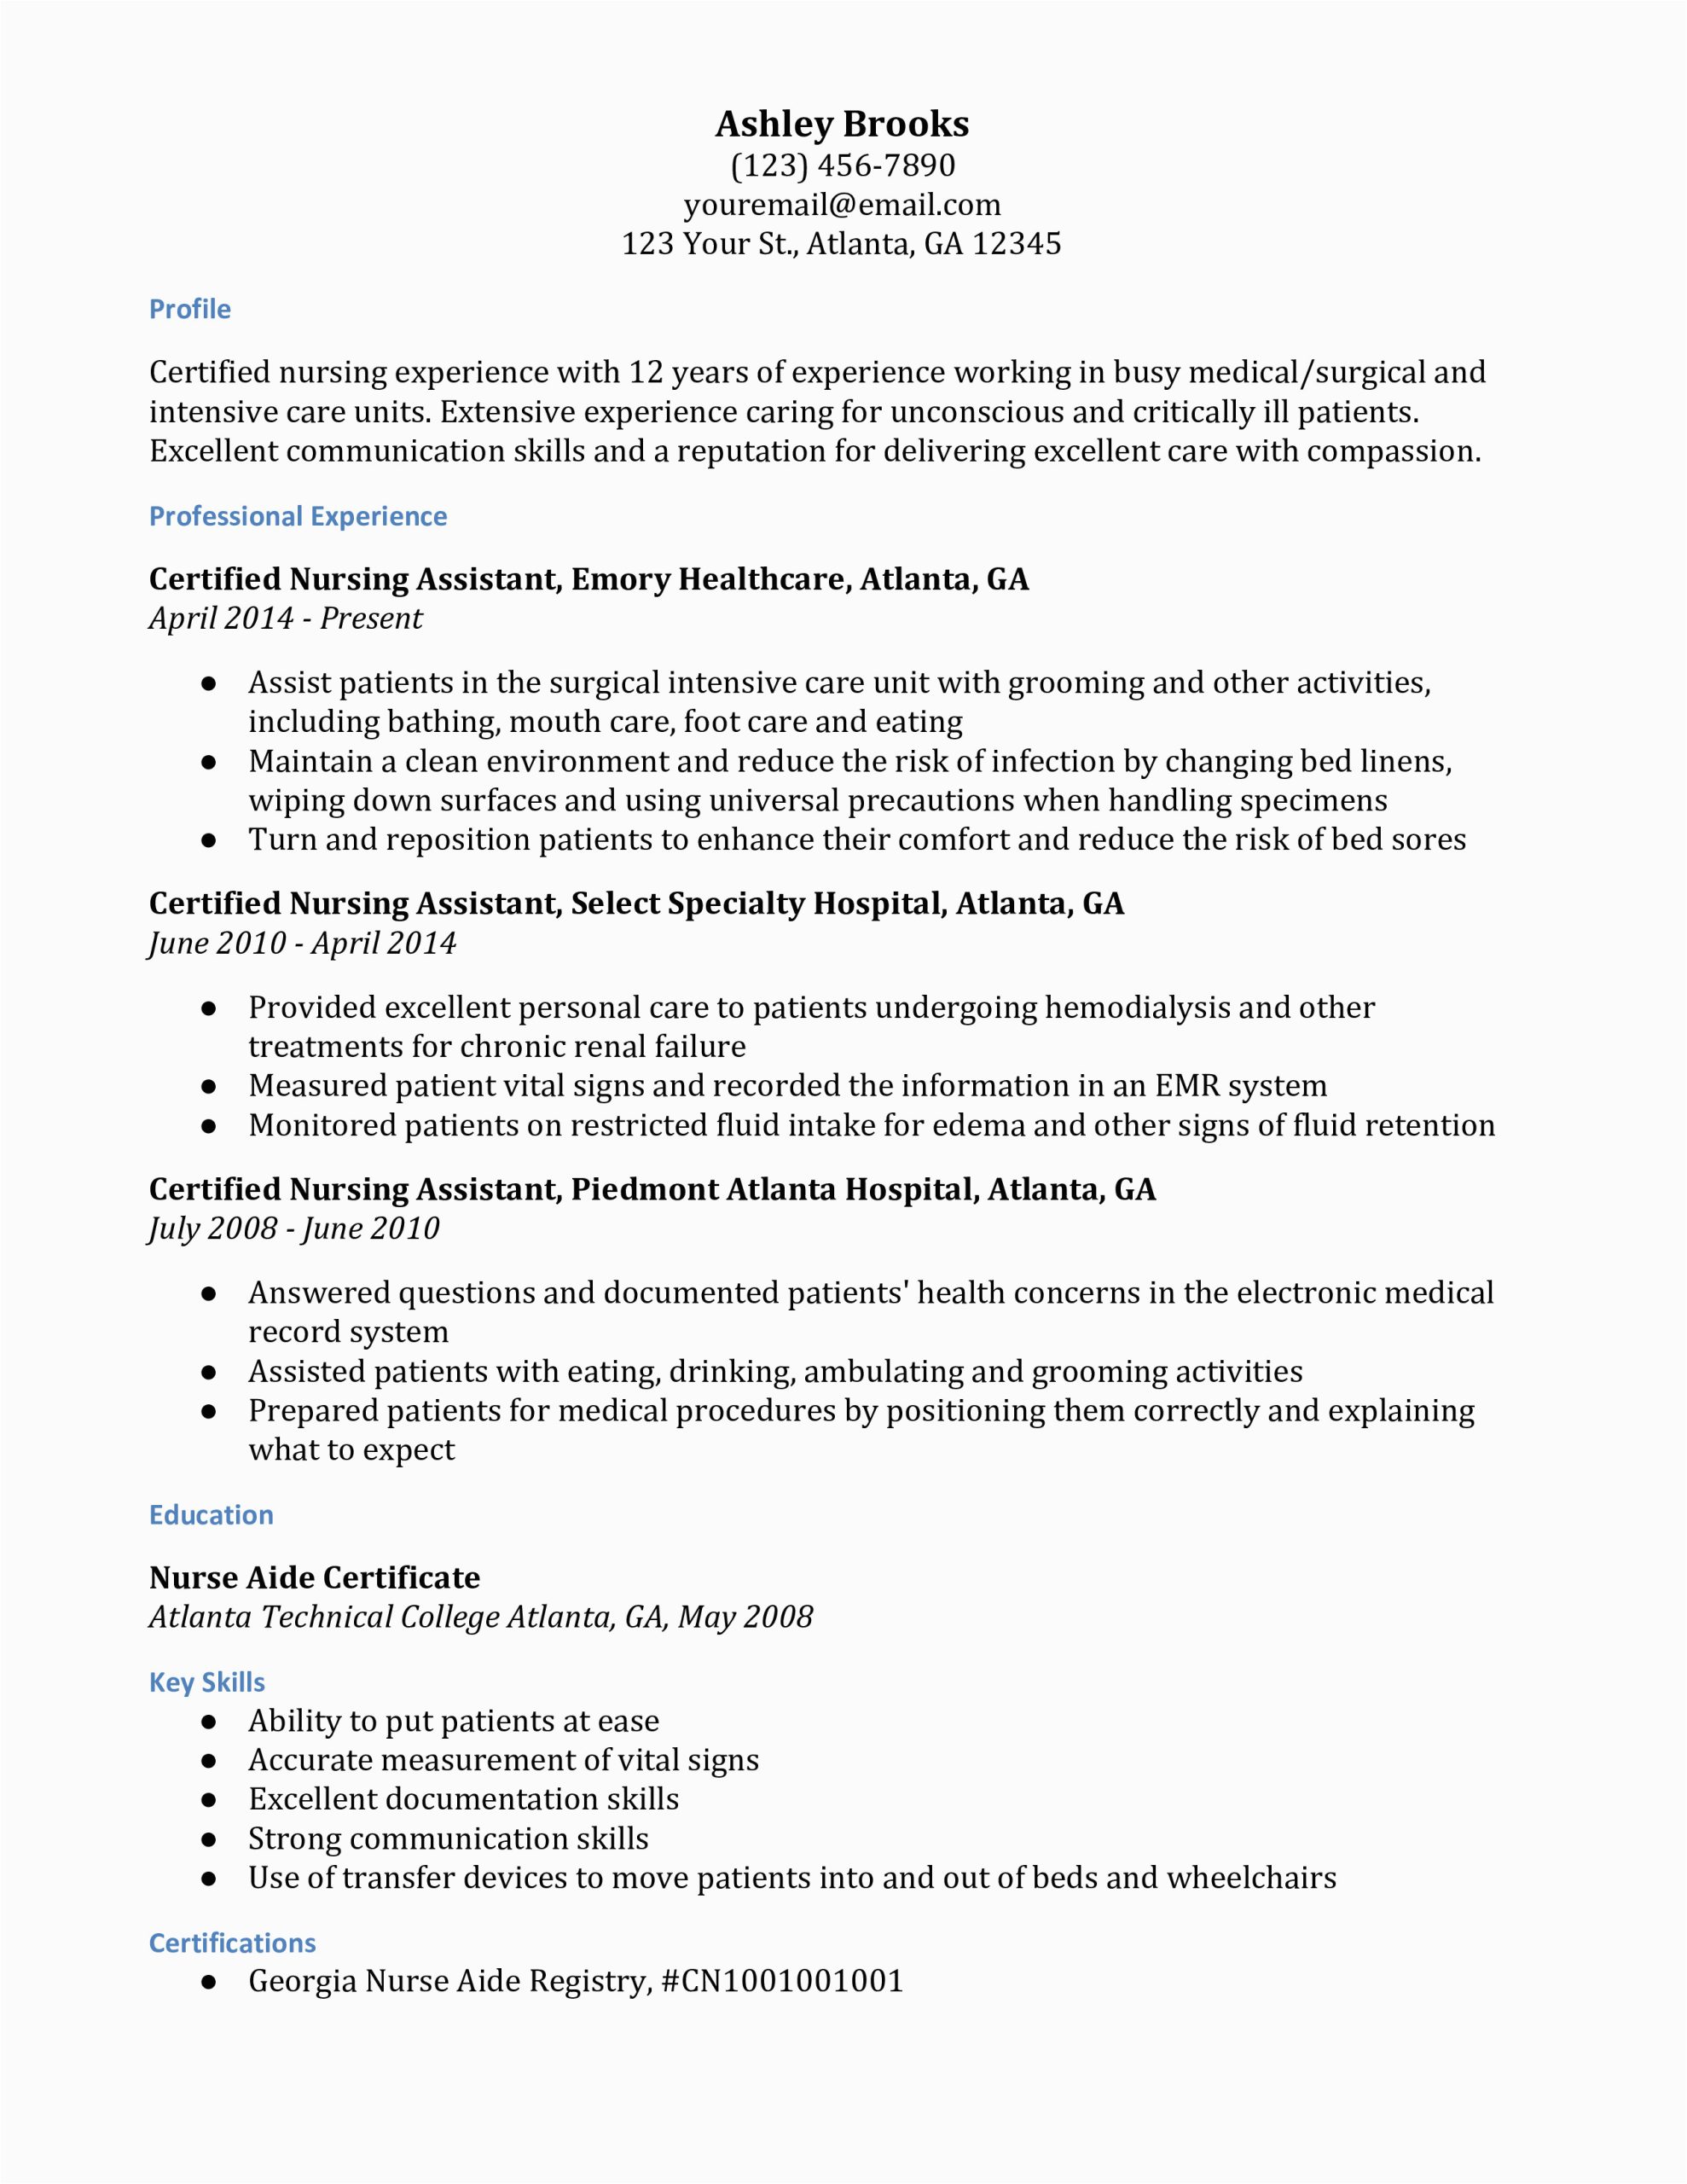 Sample Resume for Entry Level Certified Nursing assistant Cna Resume No Experience Entry Level Nursing assistant Templates